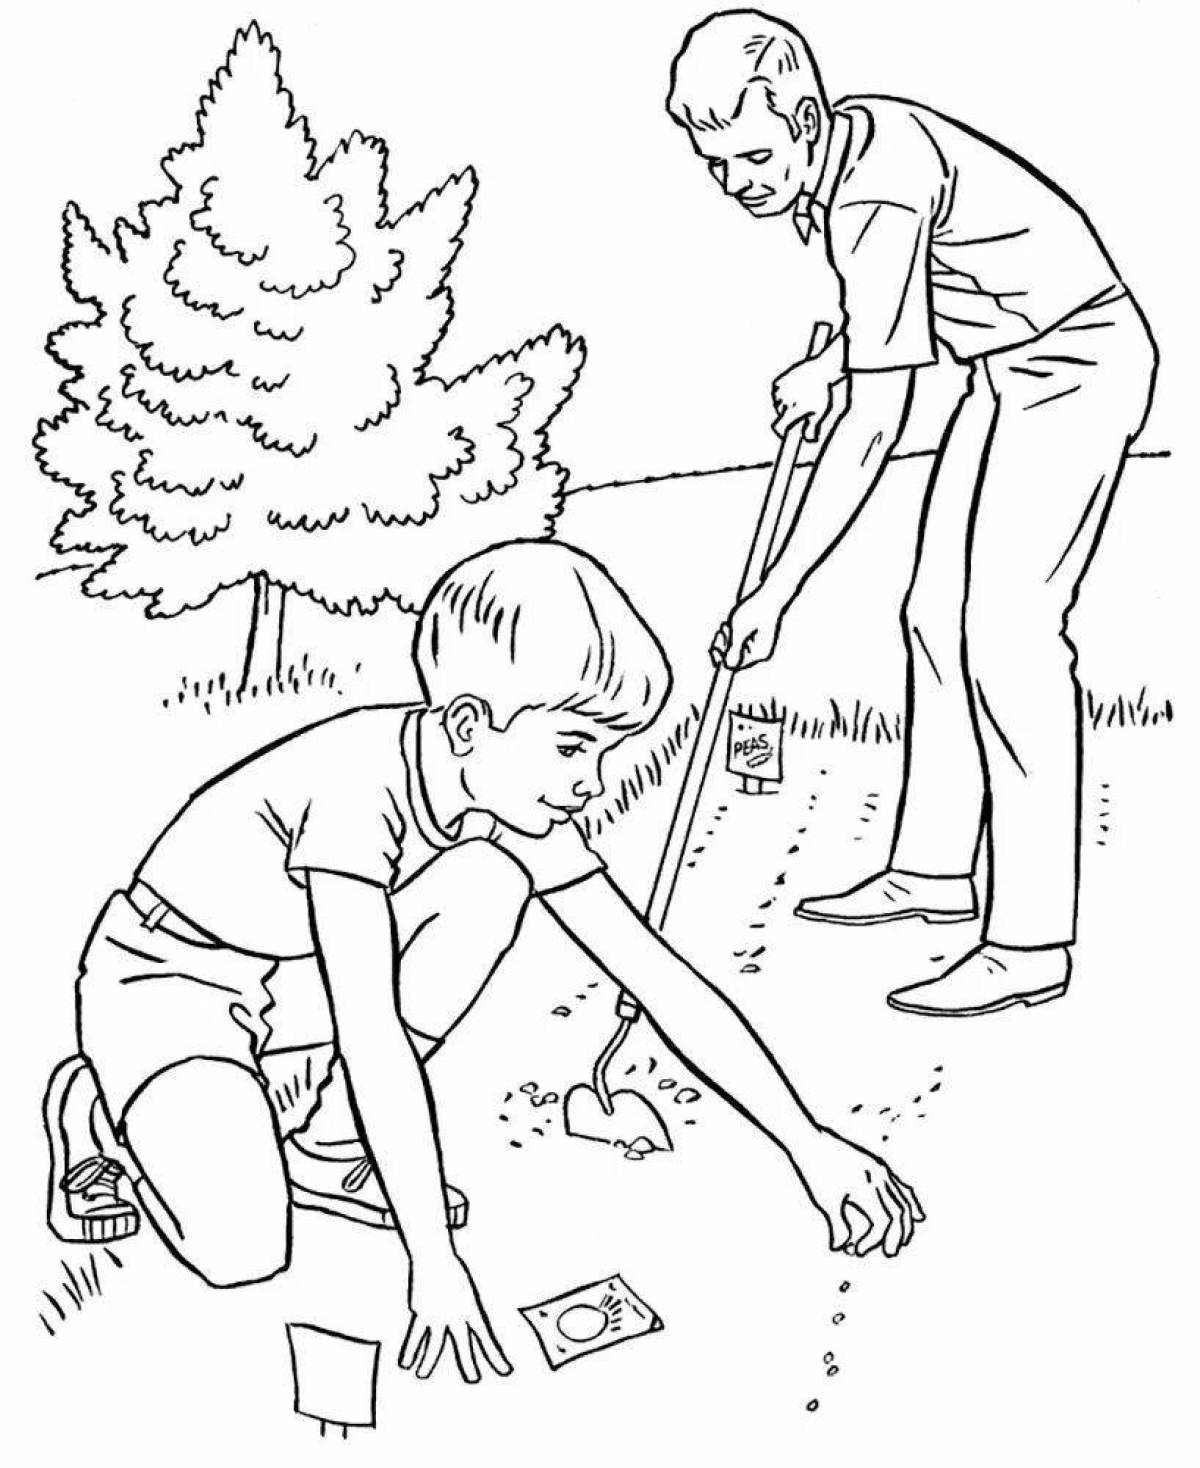 Coloring page charming man and nature